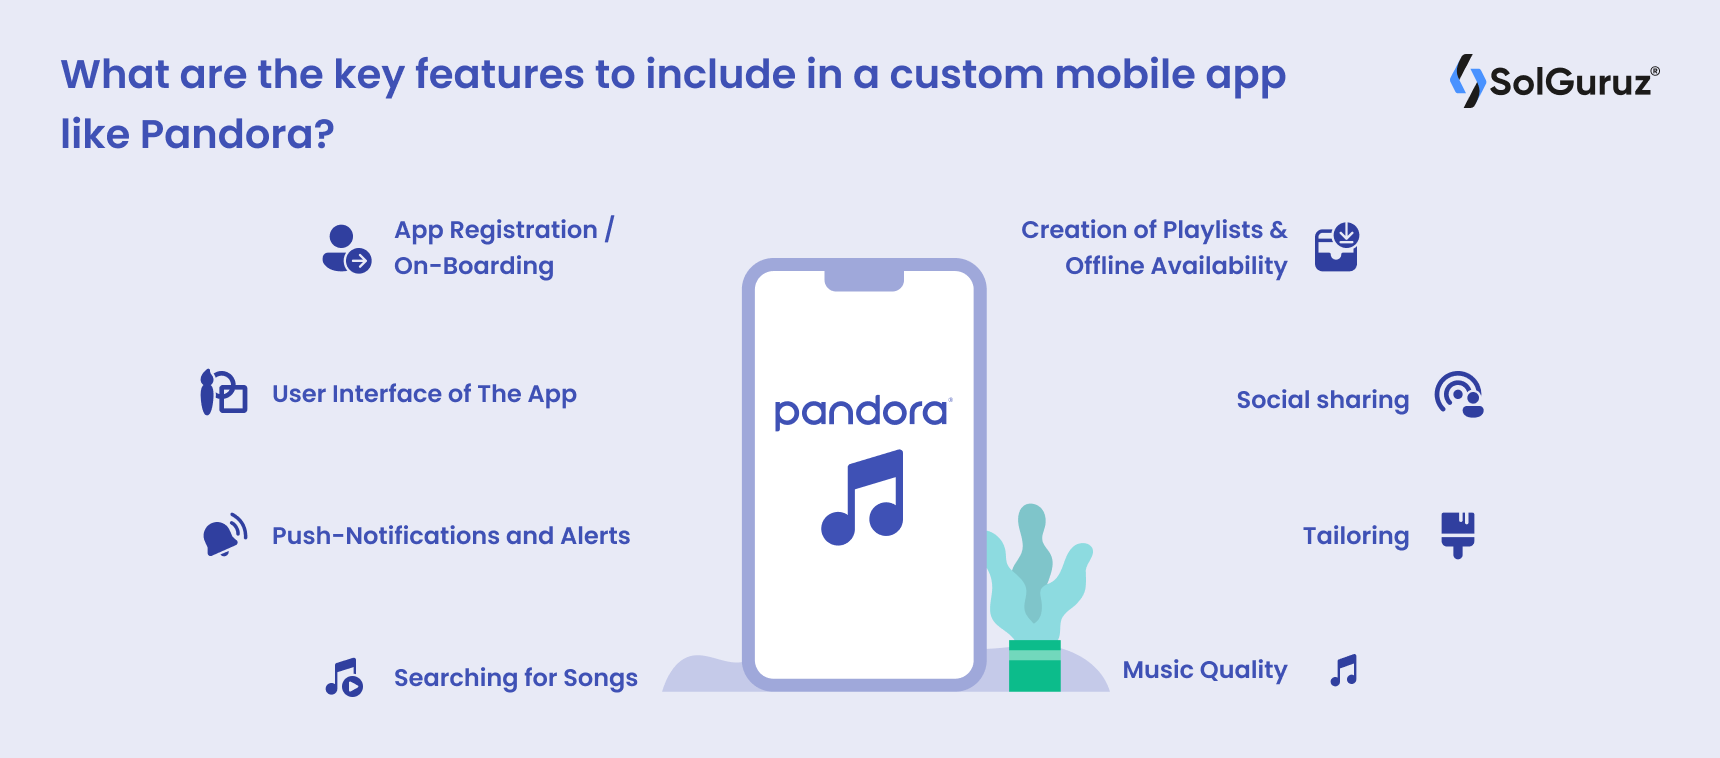 What are the key features to include in a custom mobile app like Pandora